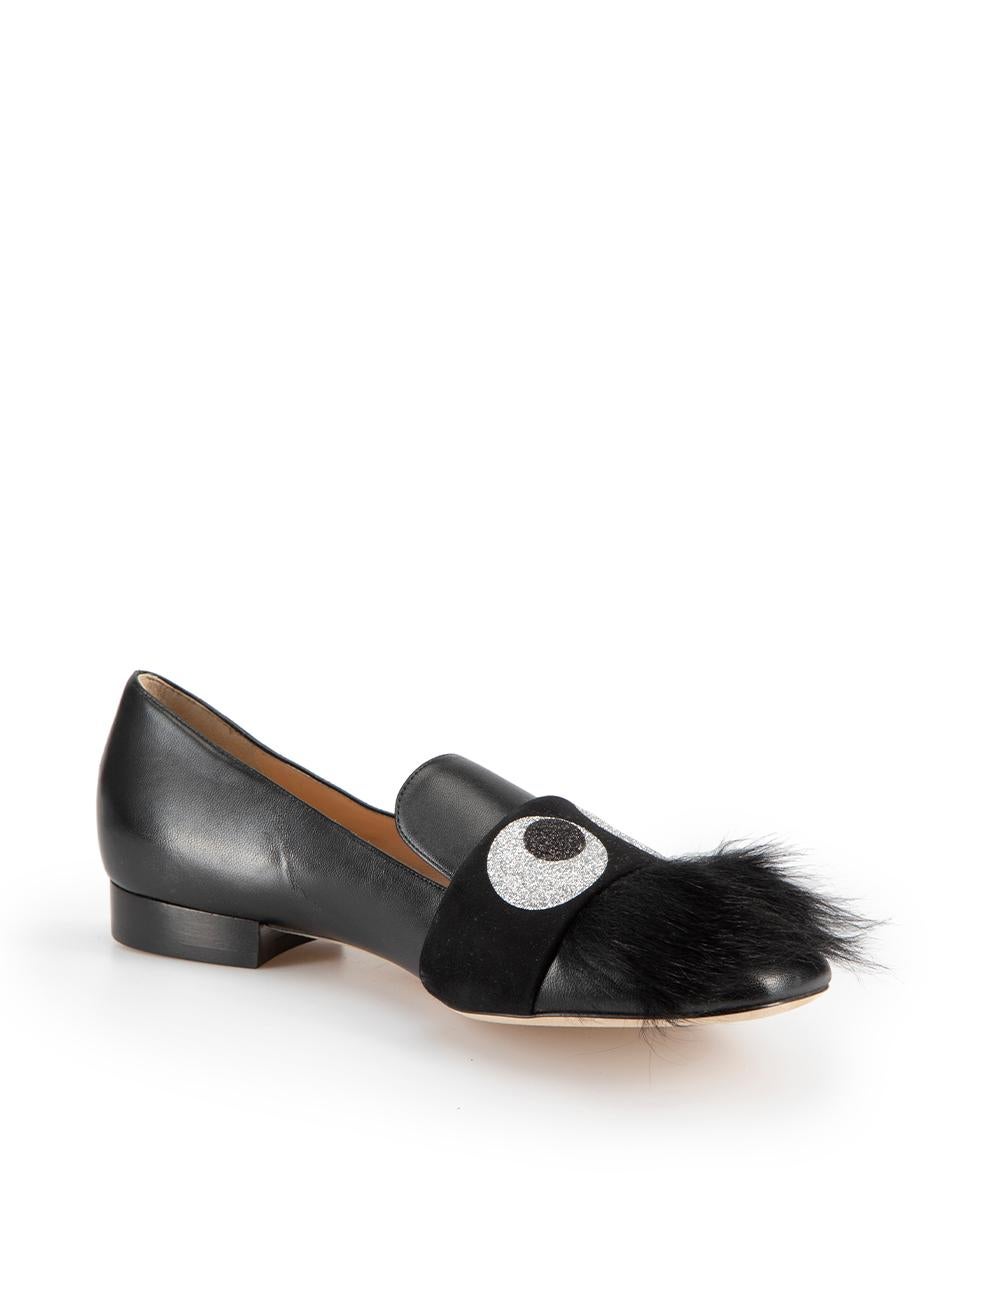 CONDITION is Never worn, with tags. No visible wear to loafers is evident on this new Anya Hindmarch designer resale item. This item comes with original dust bags.



Details


Black

Leather

Slip on loafers

Giltter eyes detail

Lamb fur